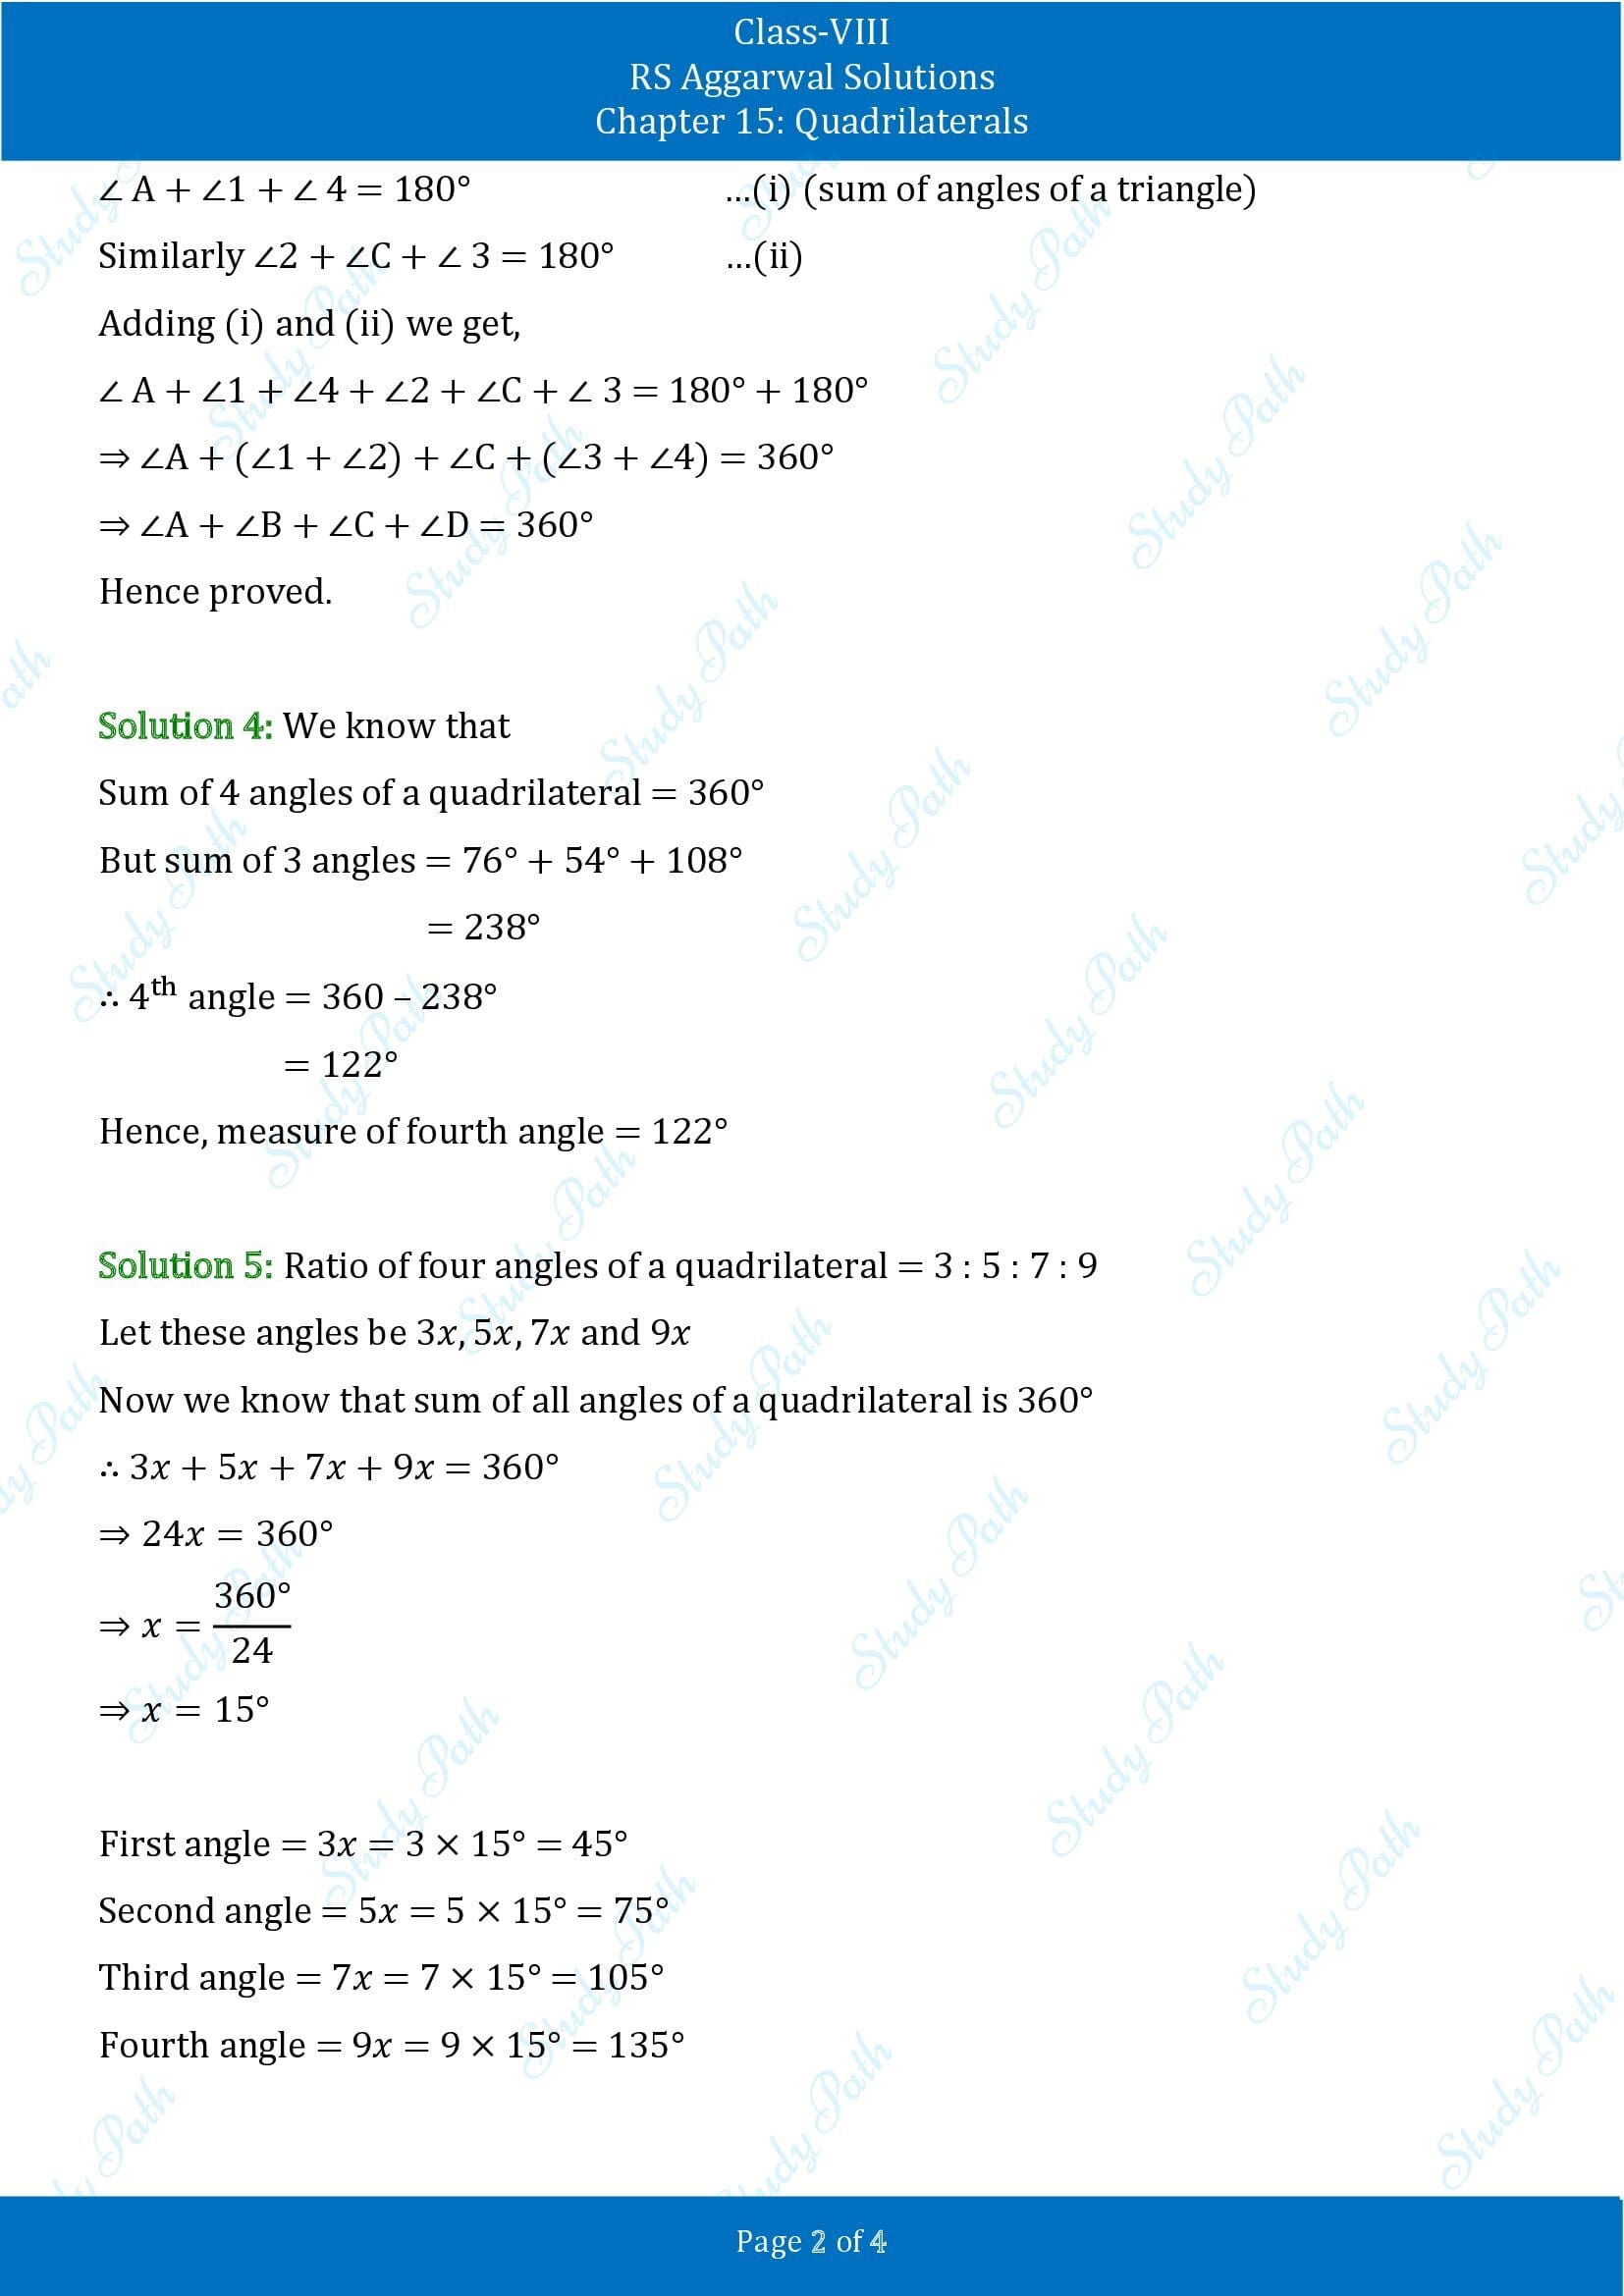 RS Aggarwal Solutions Class 8 Chapter 15 Quadrilaterals 00002